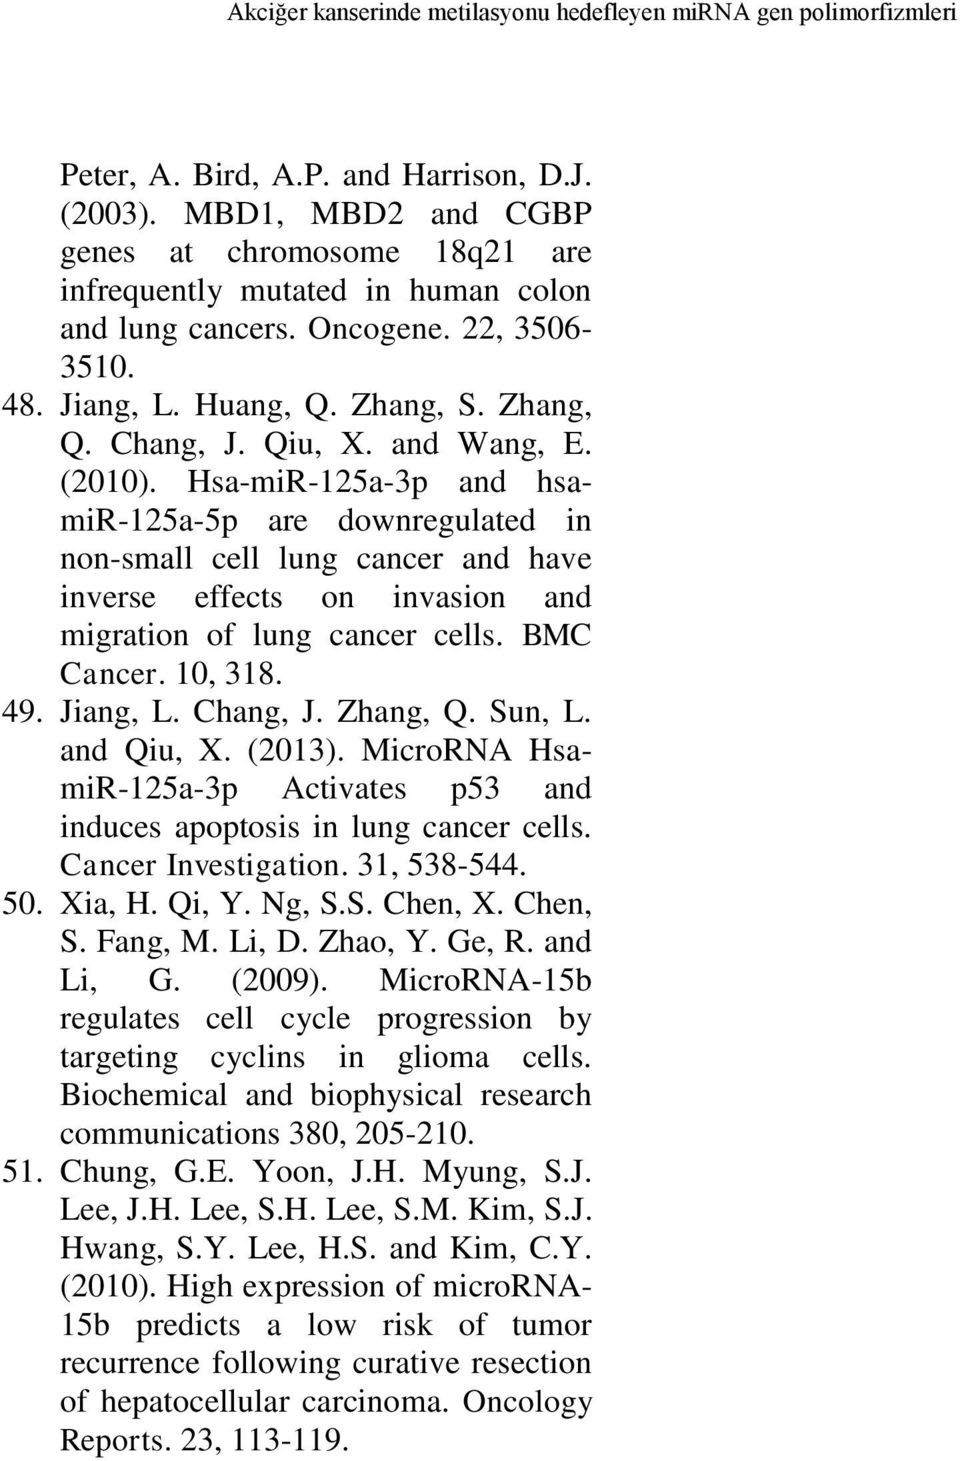 and Wang, E. (2010). Hsa-miR-125a-3p and hsamir-125a-5p are downregulated in non-small cell lung cancer and have inverse effects on invasion and migration of lung cancer cells. BMC Cancer. 10, 318.